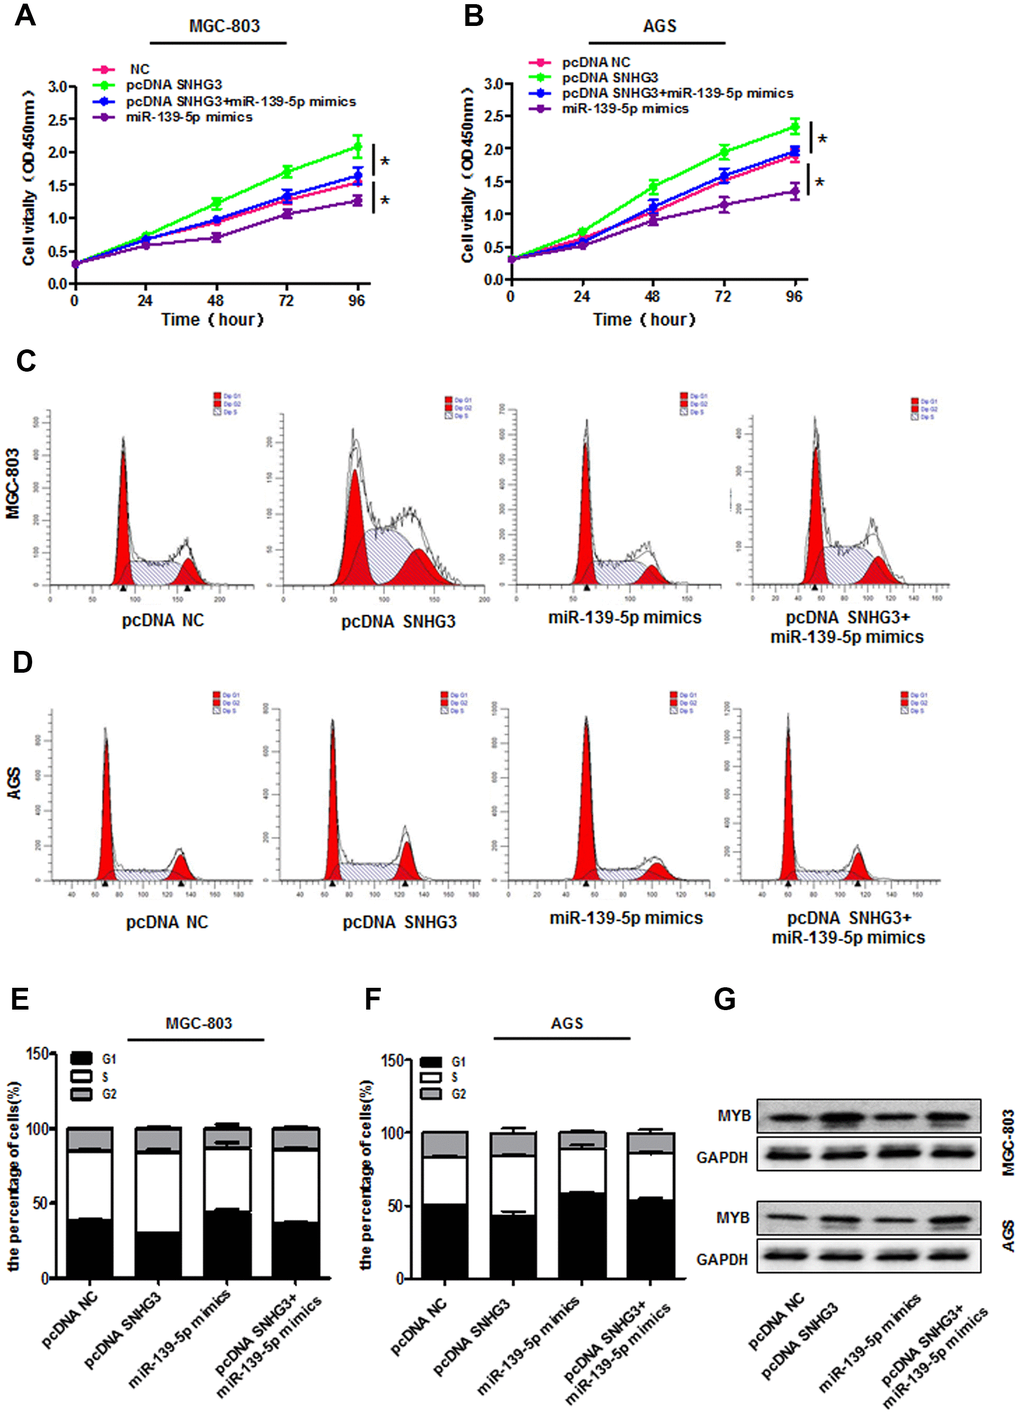 SNHG3 sequesters miR-139-5p and thereby regulates MYB expression. (A, B) AGS and MGC-803 cell proliferation was assessed via CCK-8 assay following pcDNA3.1-SNHG3, miR-139-5p mimic, and pcDNA3.1SNHG3+miR-139-5p mimic transfection. *PC–F) Cell cycle progression in AGS and MGC-803 cells transfected as in (A, B) was assessed via flow cytometry. (G) MYB protein levels in AGS and MGC-803 cells transfected as in (A, B) were measured.